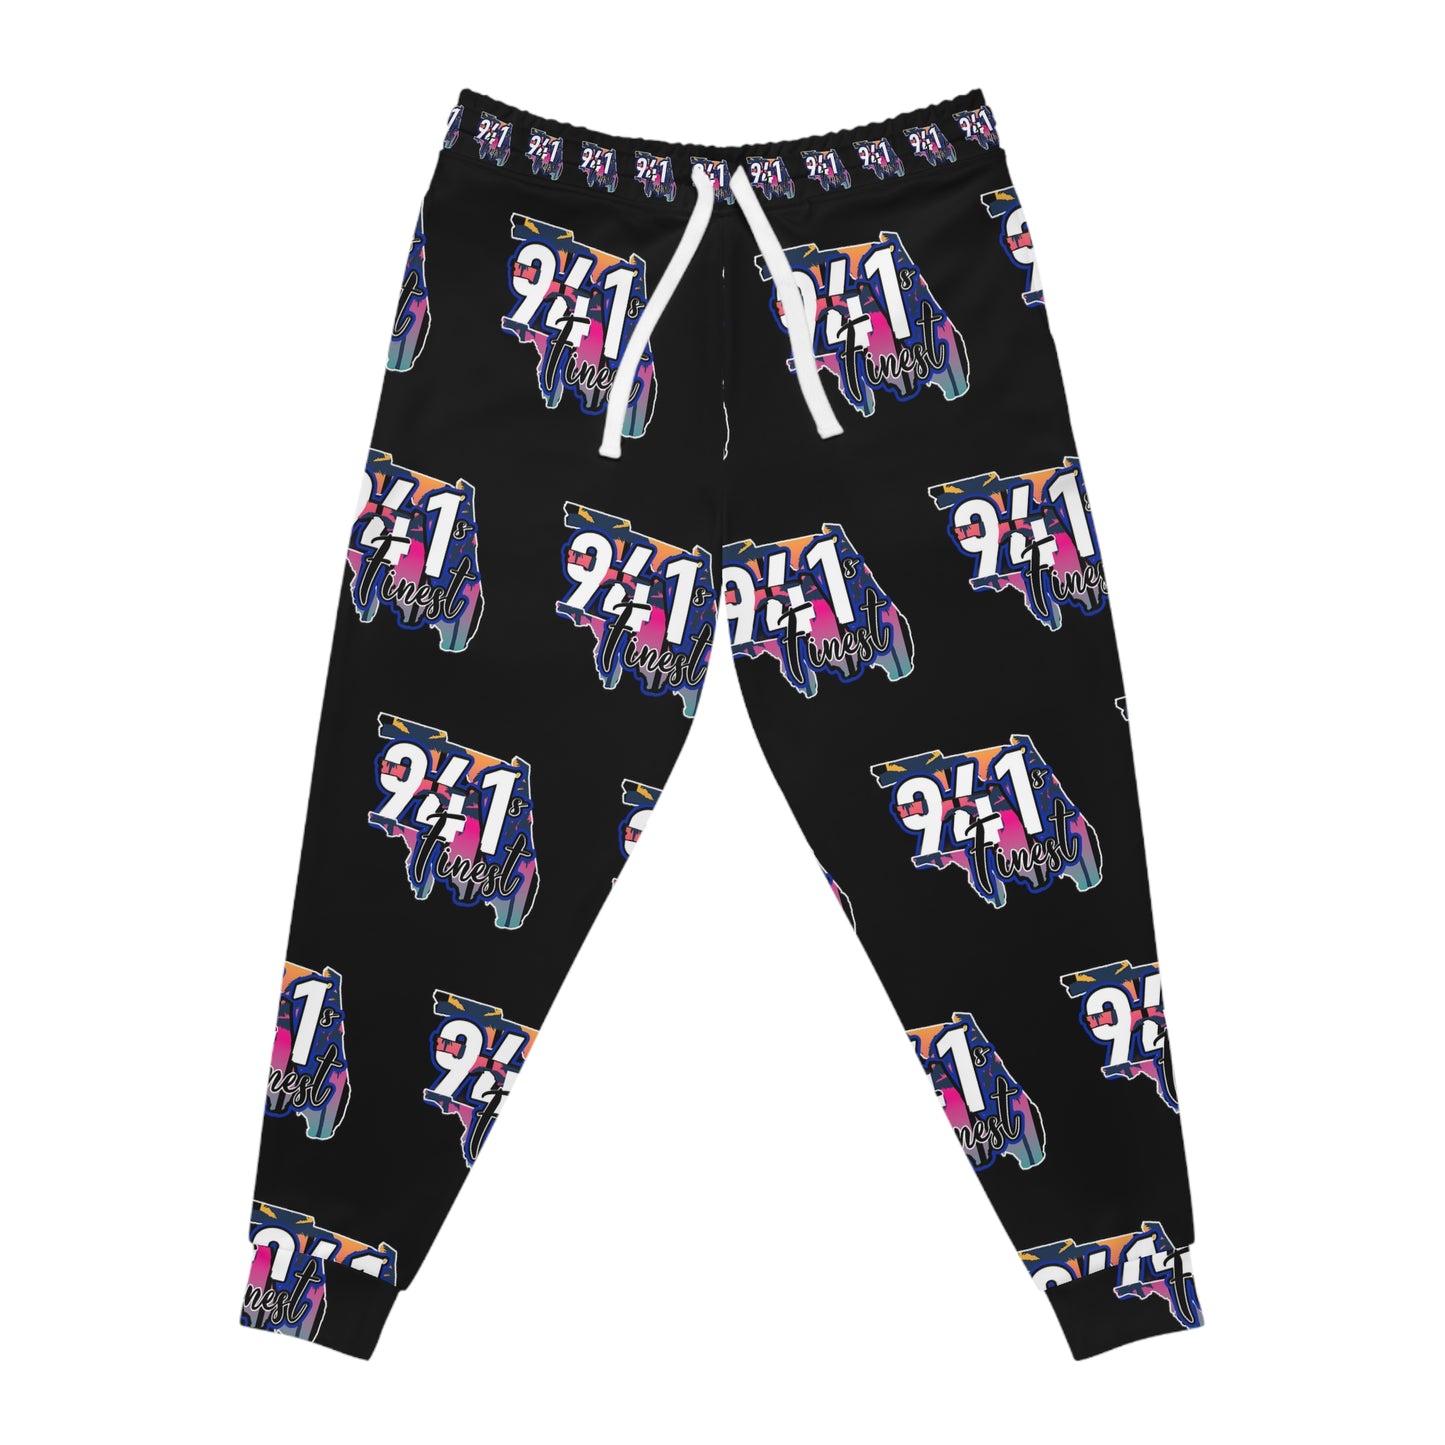 941’s Finest Joggers